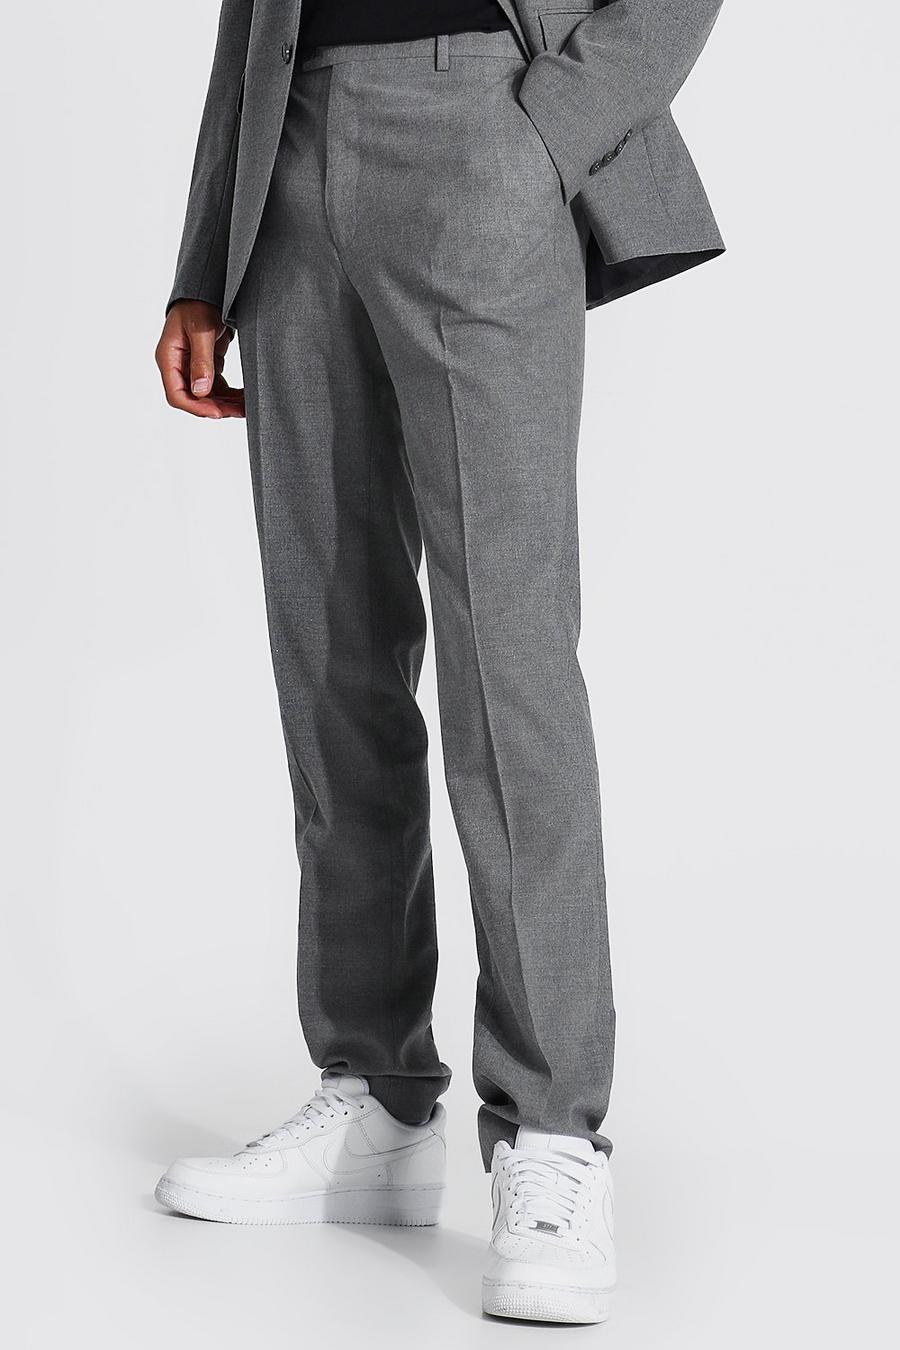 Grey Tall Slim Fit Trouser image number 1